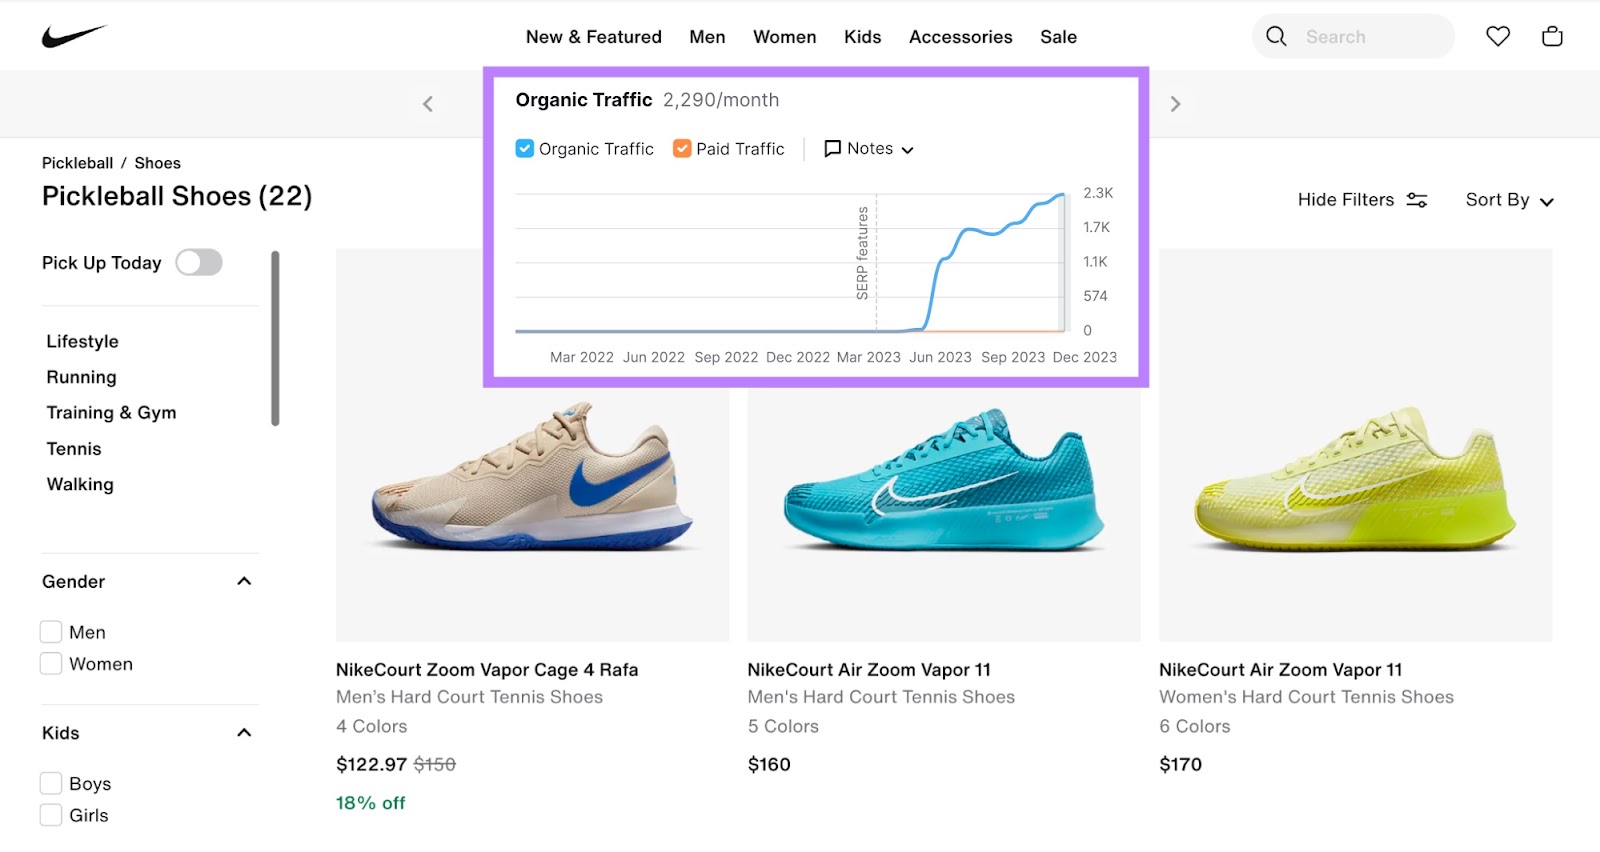 Pickleball Shoes product category on Nike's page